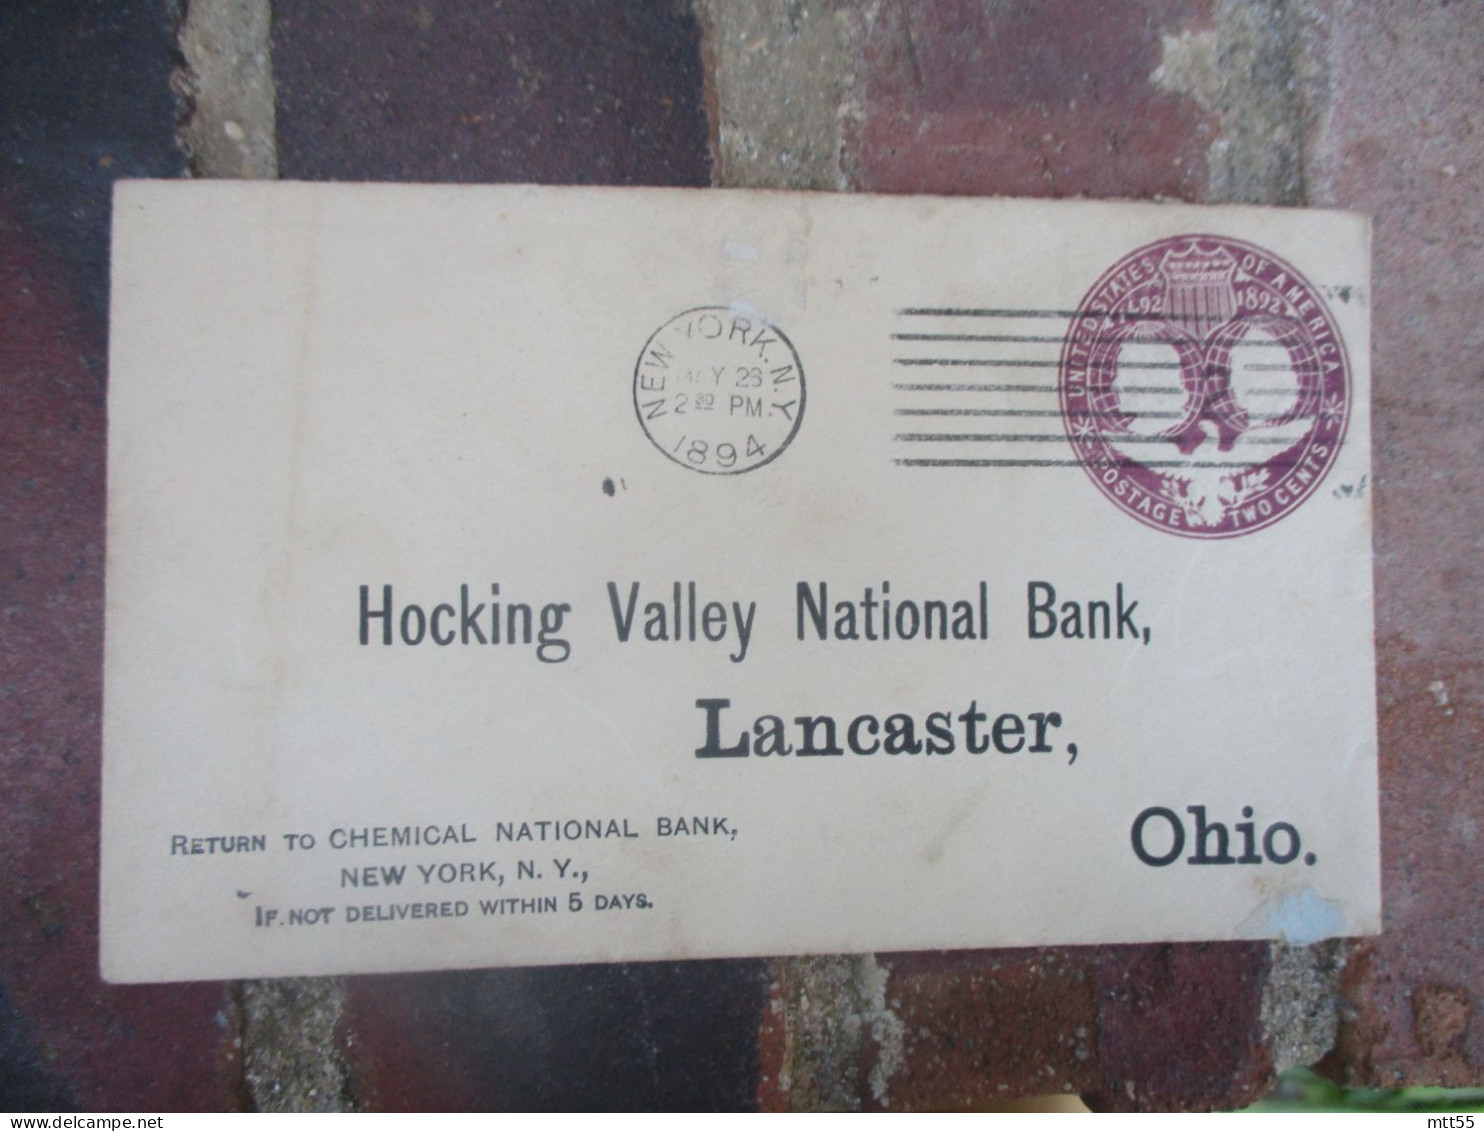 REPIQUAGE HOCKING VALLEY BANK LANCASTER OHIO ENTIER POSTAL STATIONERY CARD POSTAGE TWO CENT 1894 - ...-1900